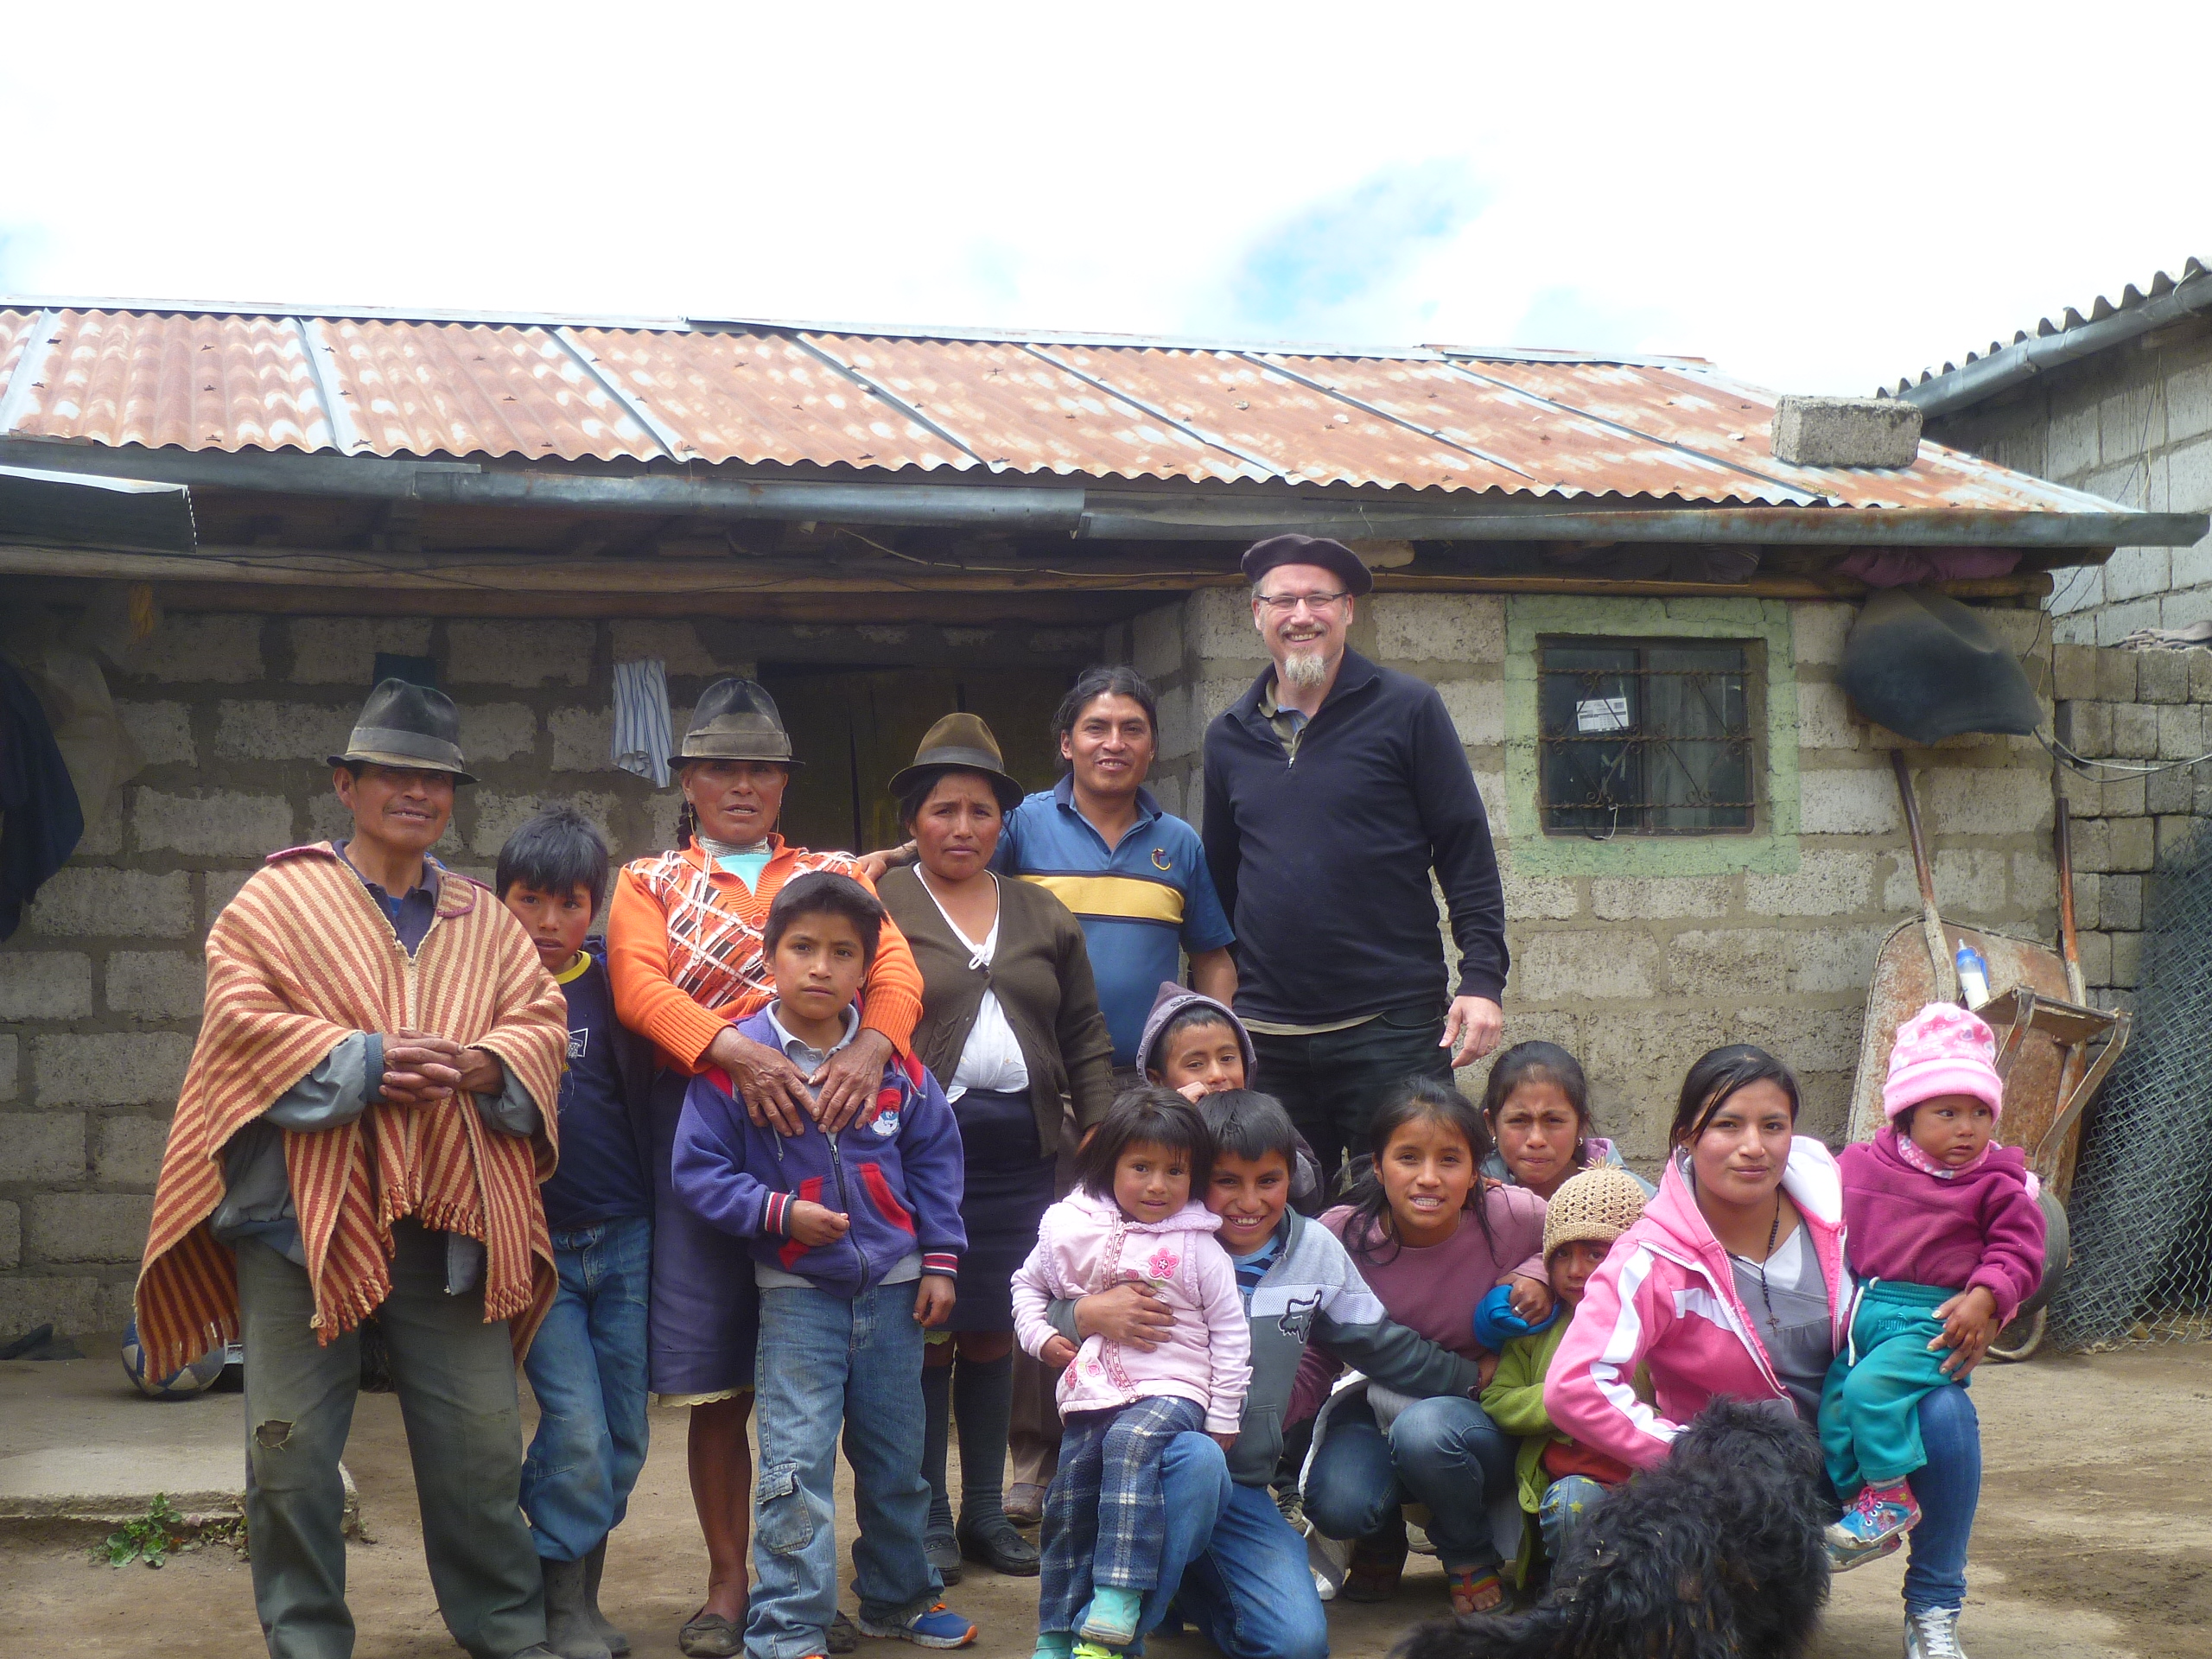 Professor Olaf Kaltmeier surrounded by his host family in front of their house.